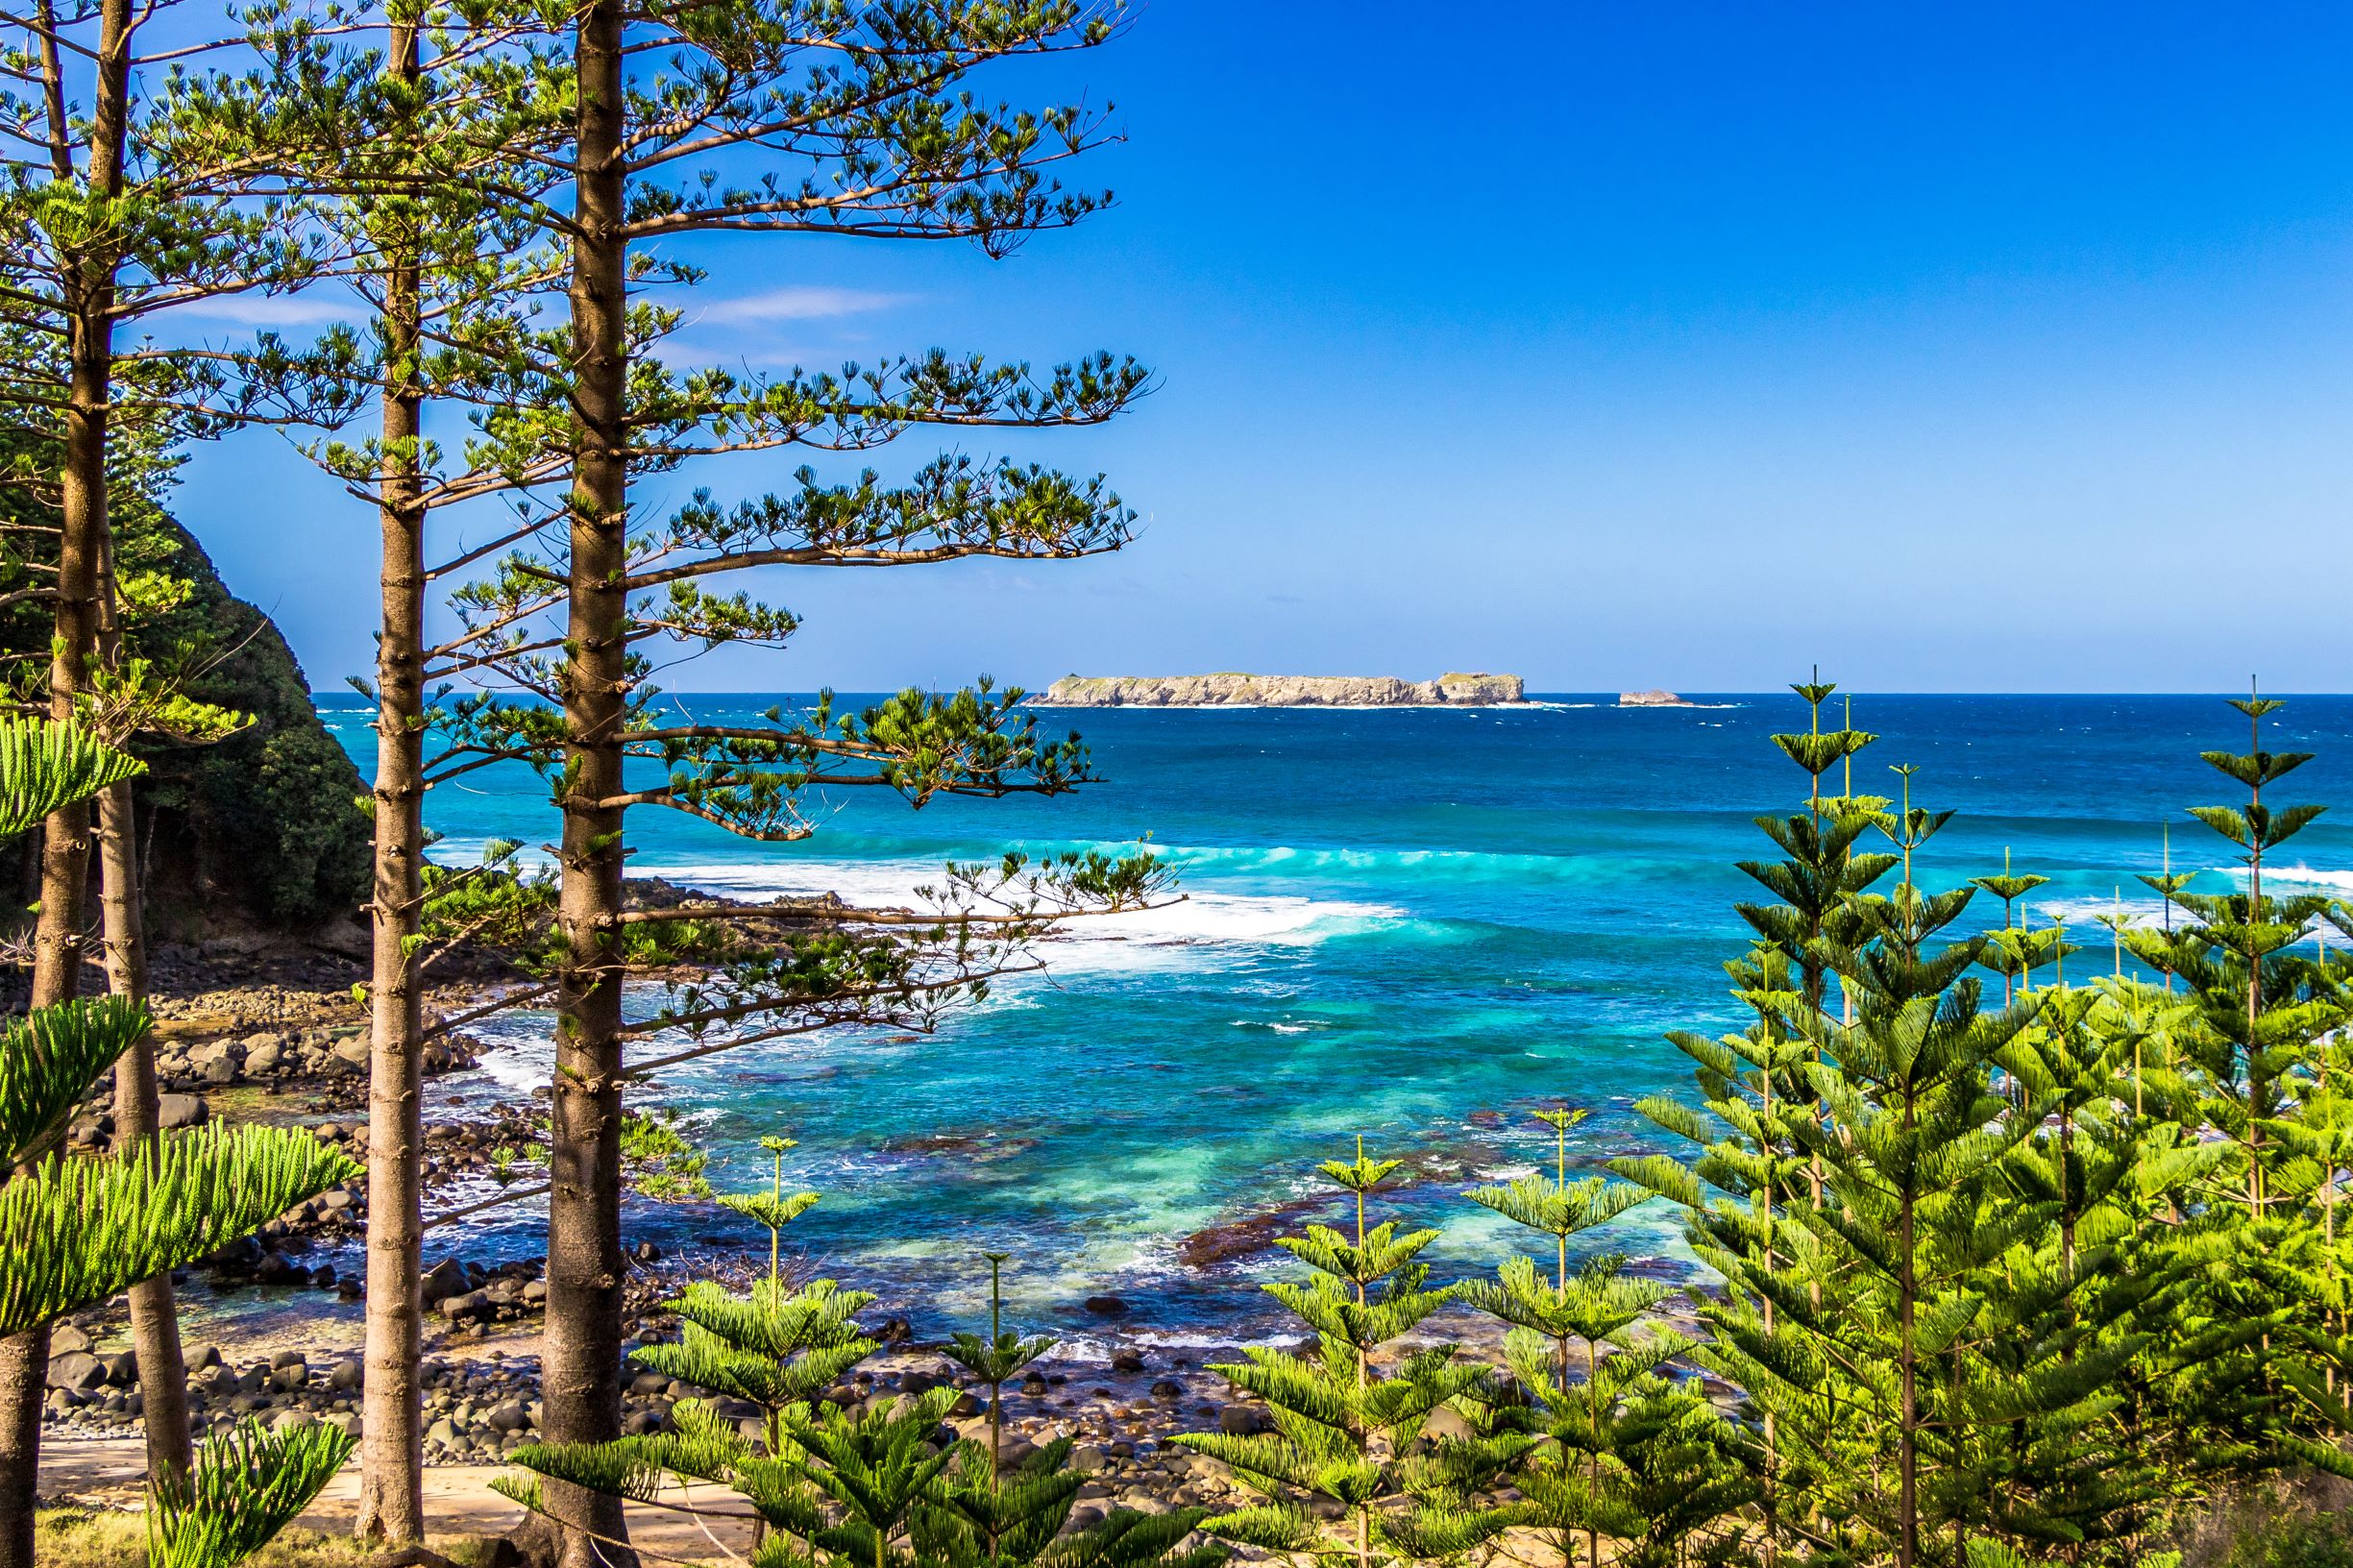 can you visit norfolk island